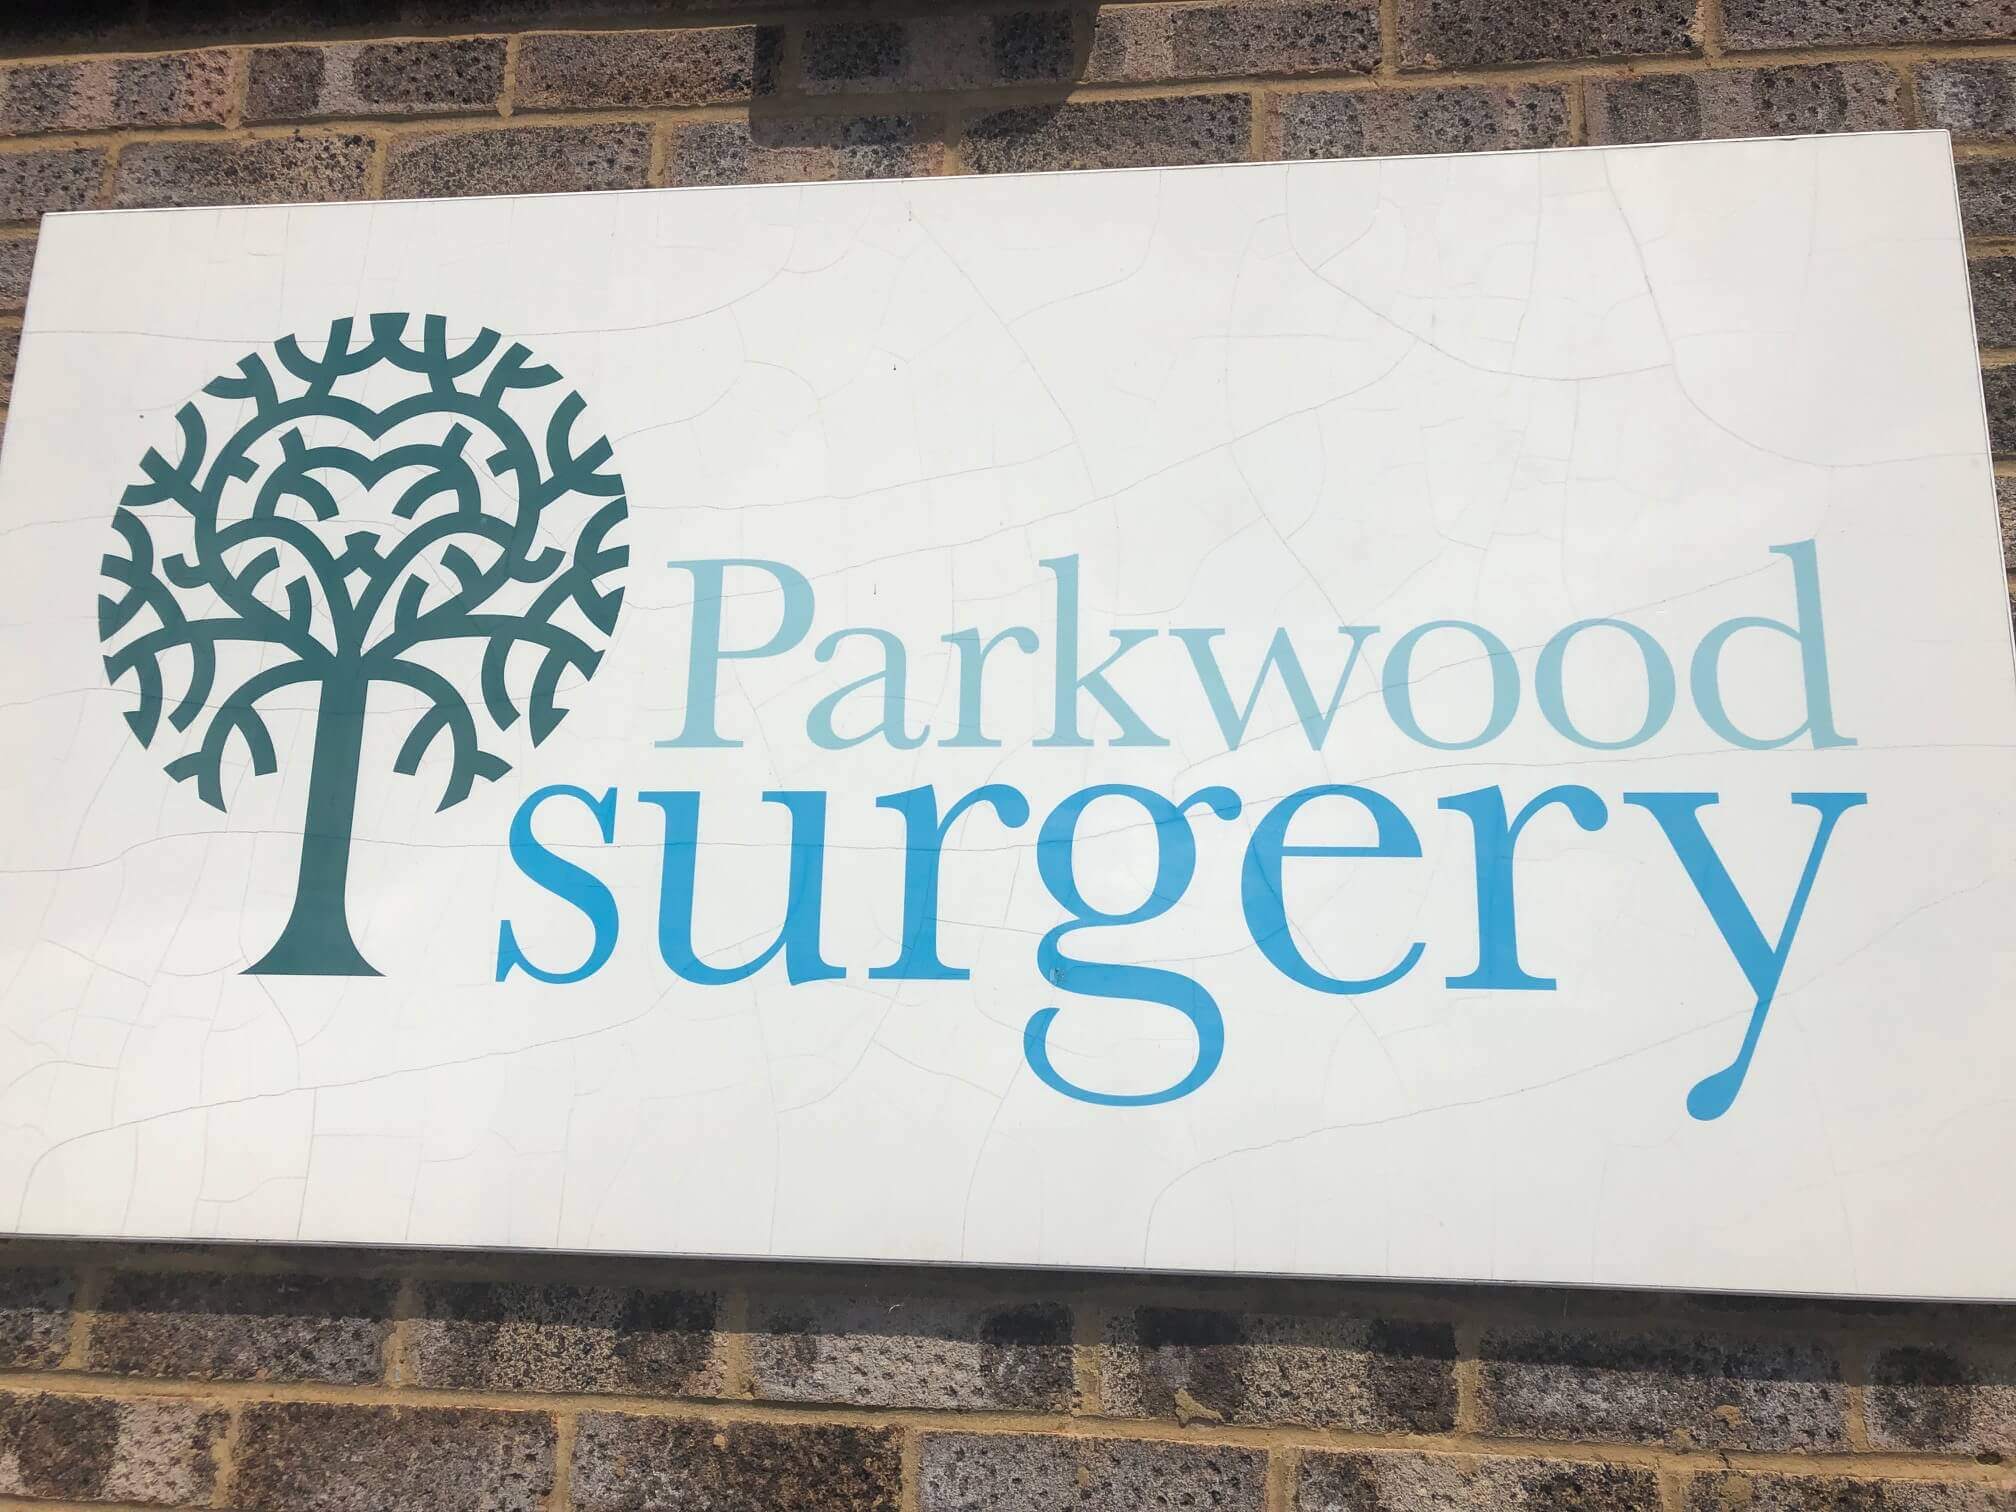 Parkwood surgery sign